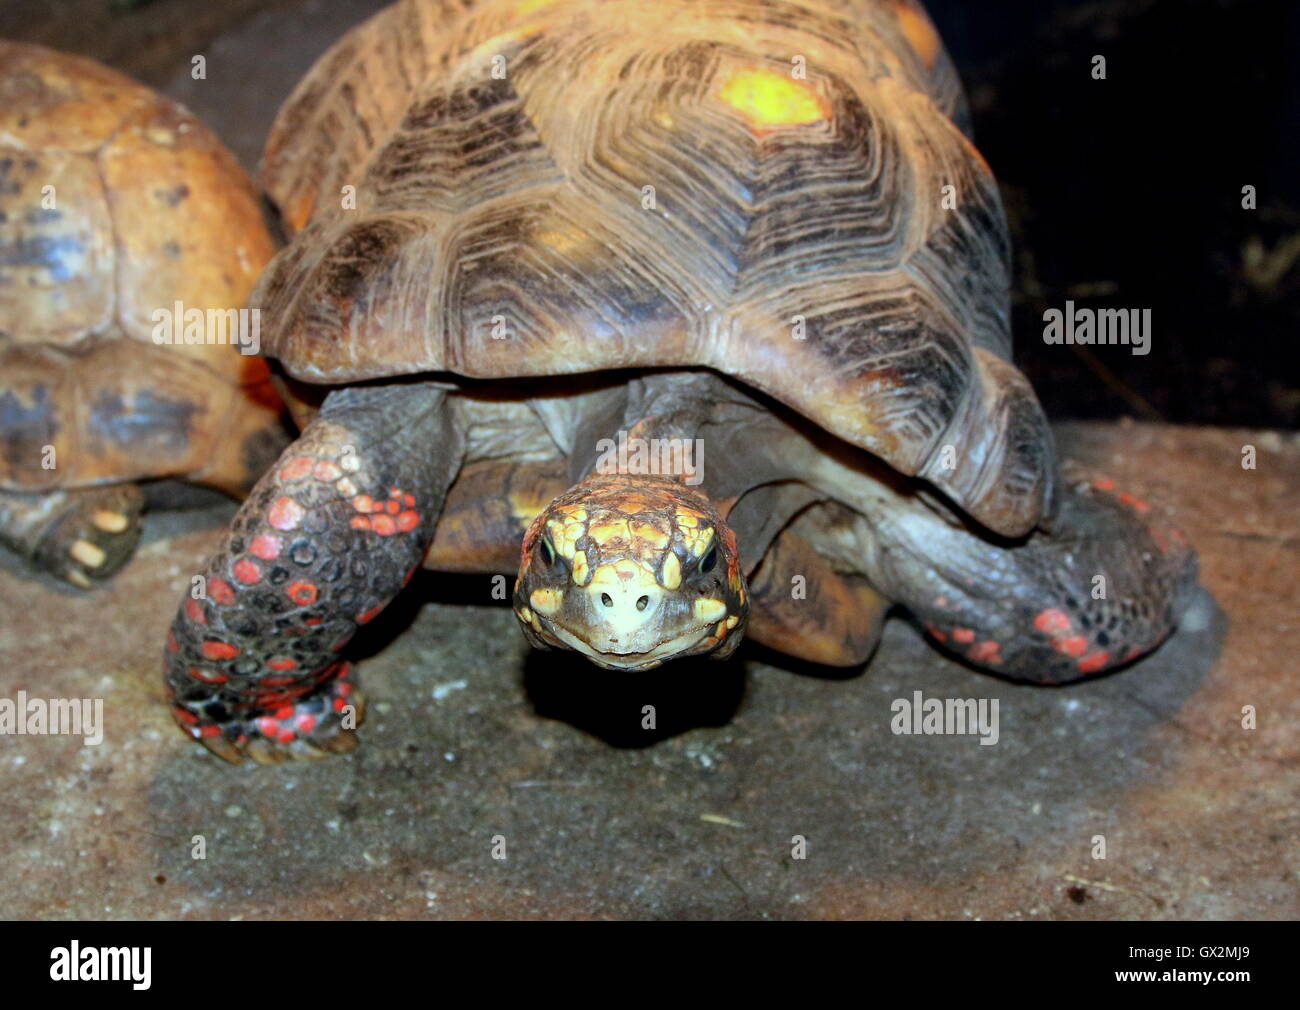 South American Red footed tortoise (Chelonoidis carbonaria), coming towards the camera Stock Photo